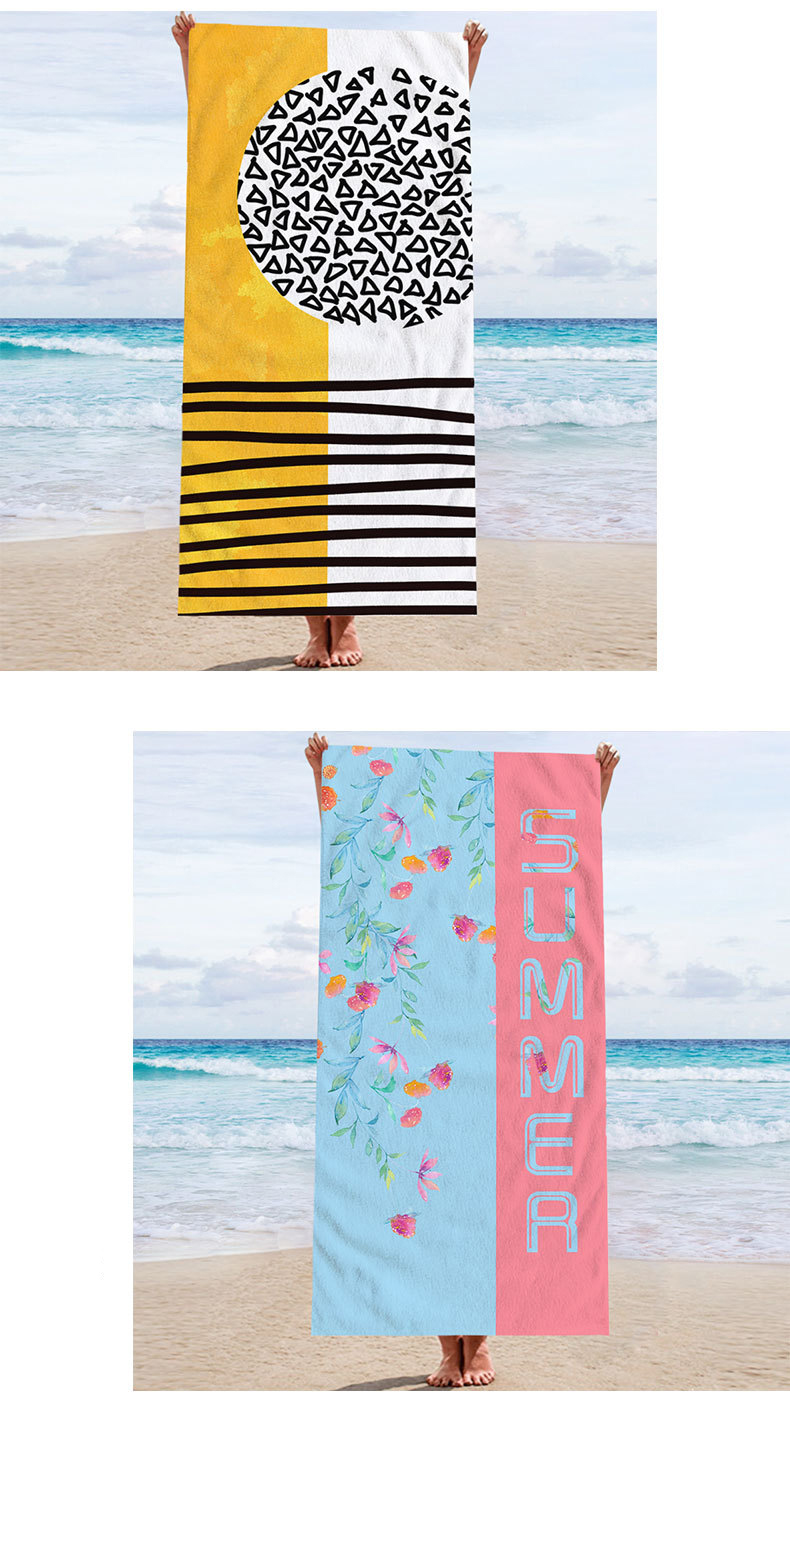 Absorbent Compact Beach Blanket for ladies